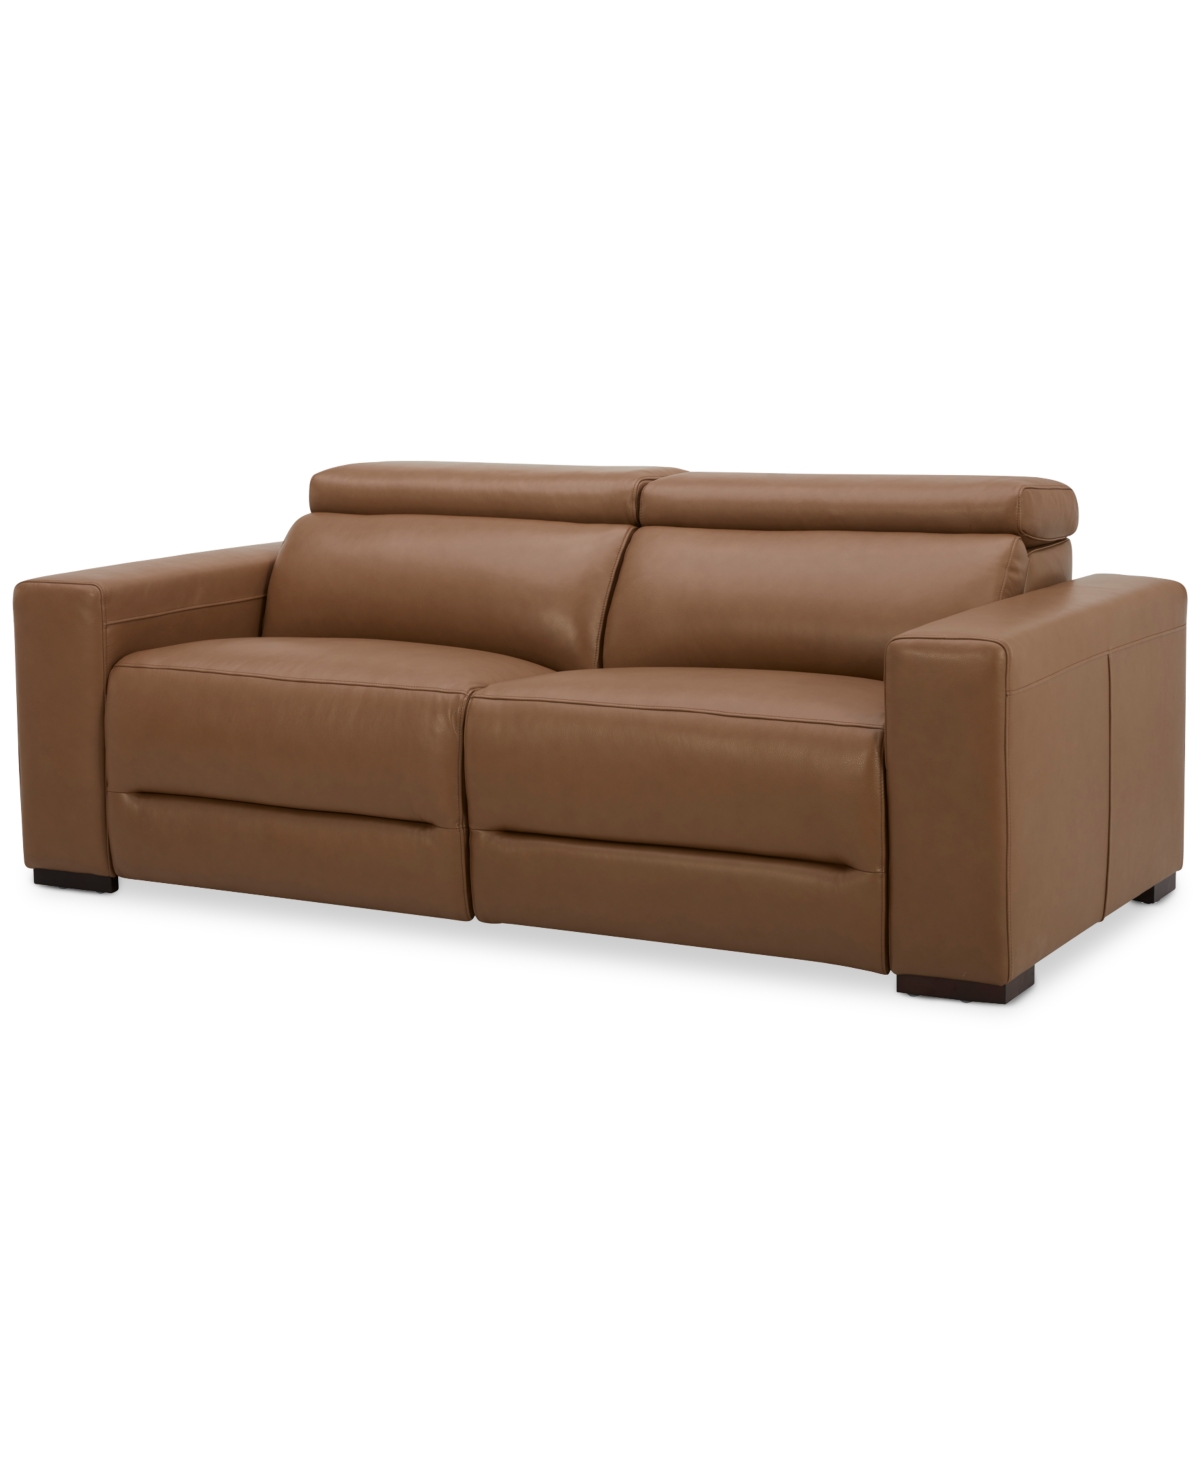 Macy's Nevio 82" 2-pc. Leather Sectional With 2 Power Recliners And Headrests, Created For  In Butternut